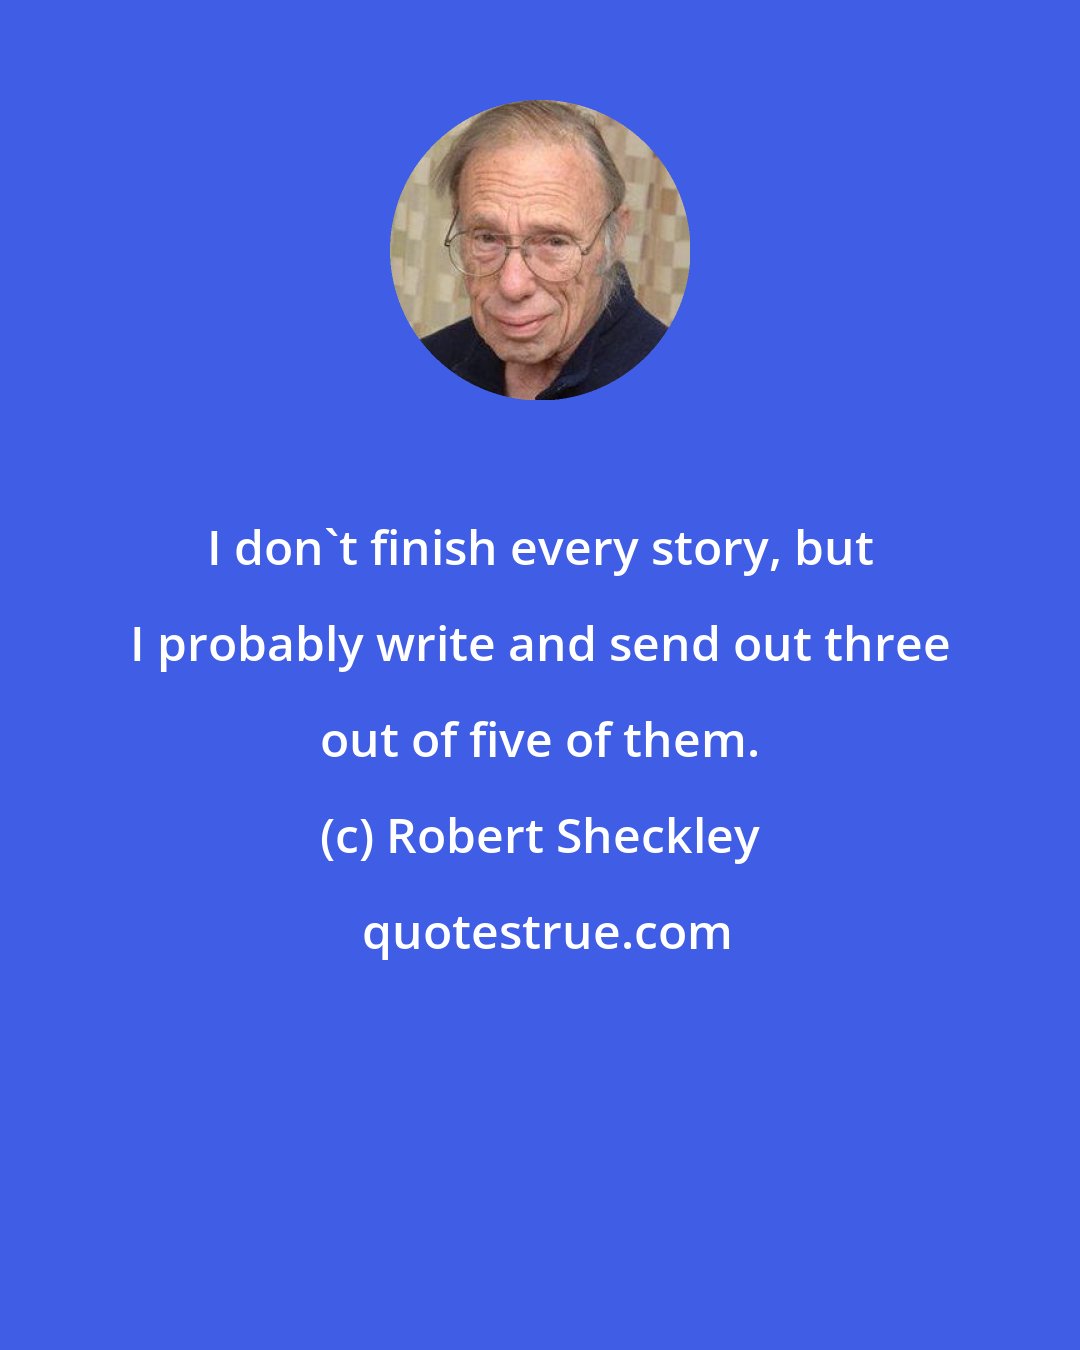 Robert Sheckley: I don't finish every story, but I probably write and send out three out of five of them.